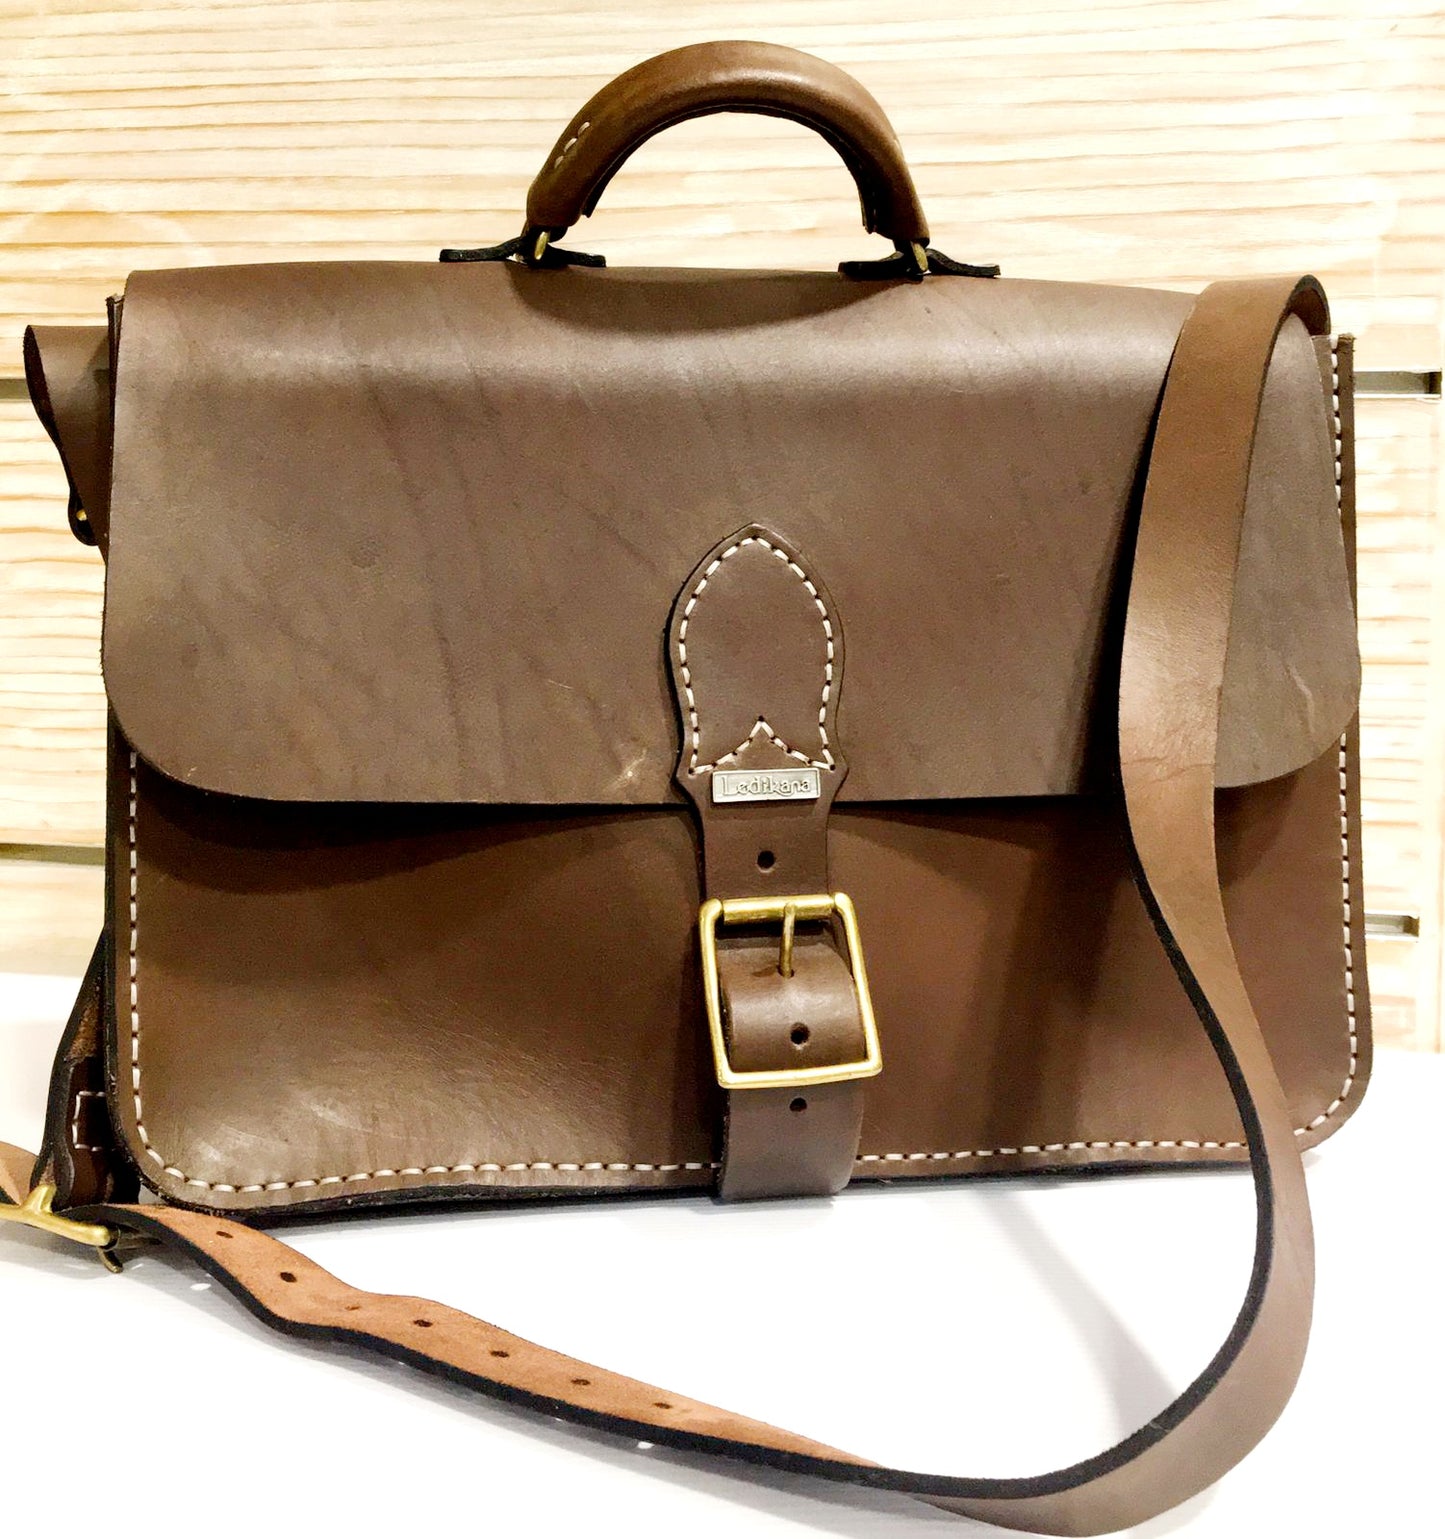 GENTS BRIEF LEATHER BAG